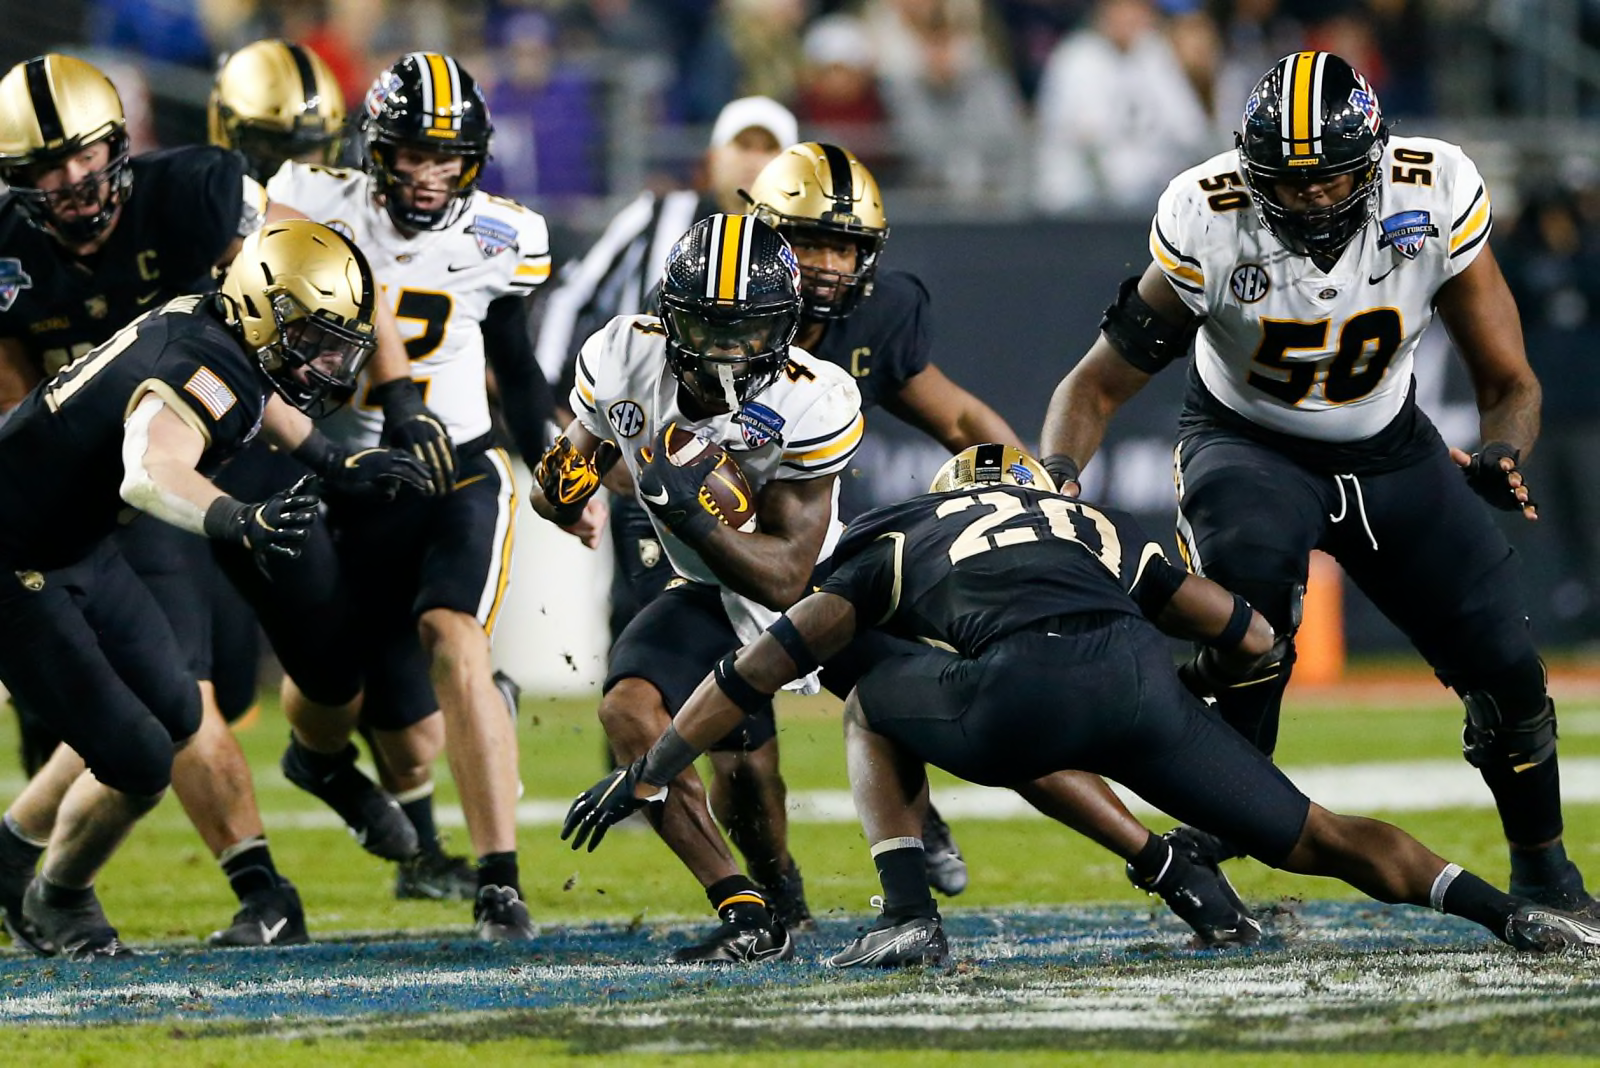 Army Football: 2022 Black Knights season preview and prediction - Page 3